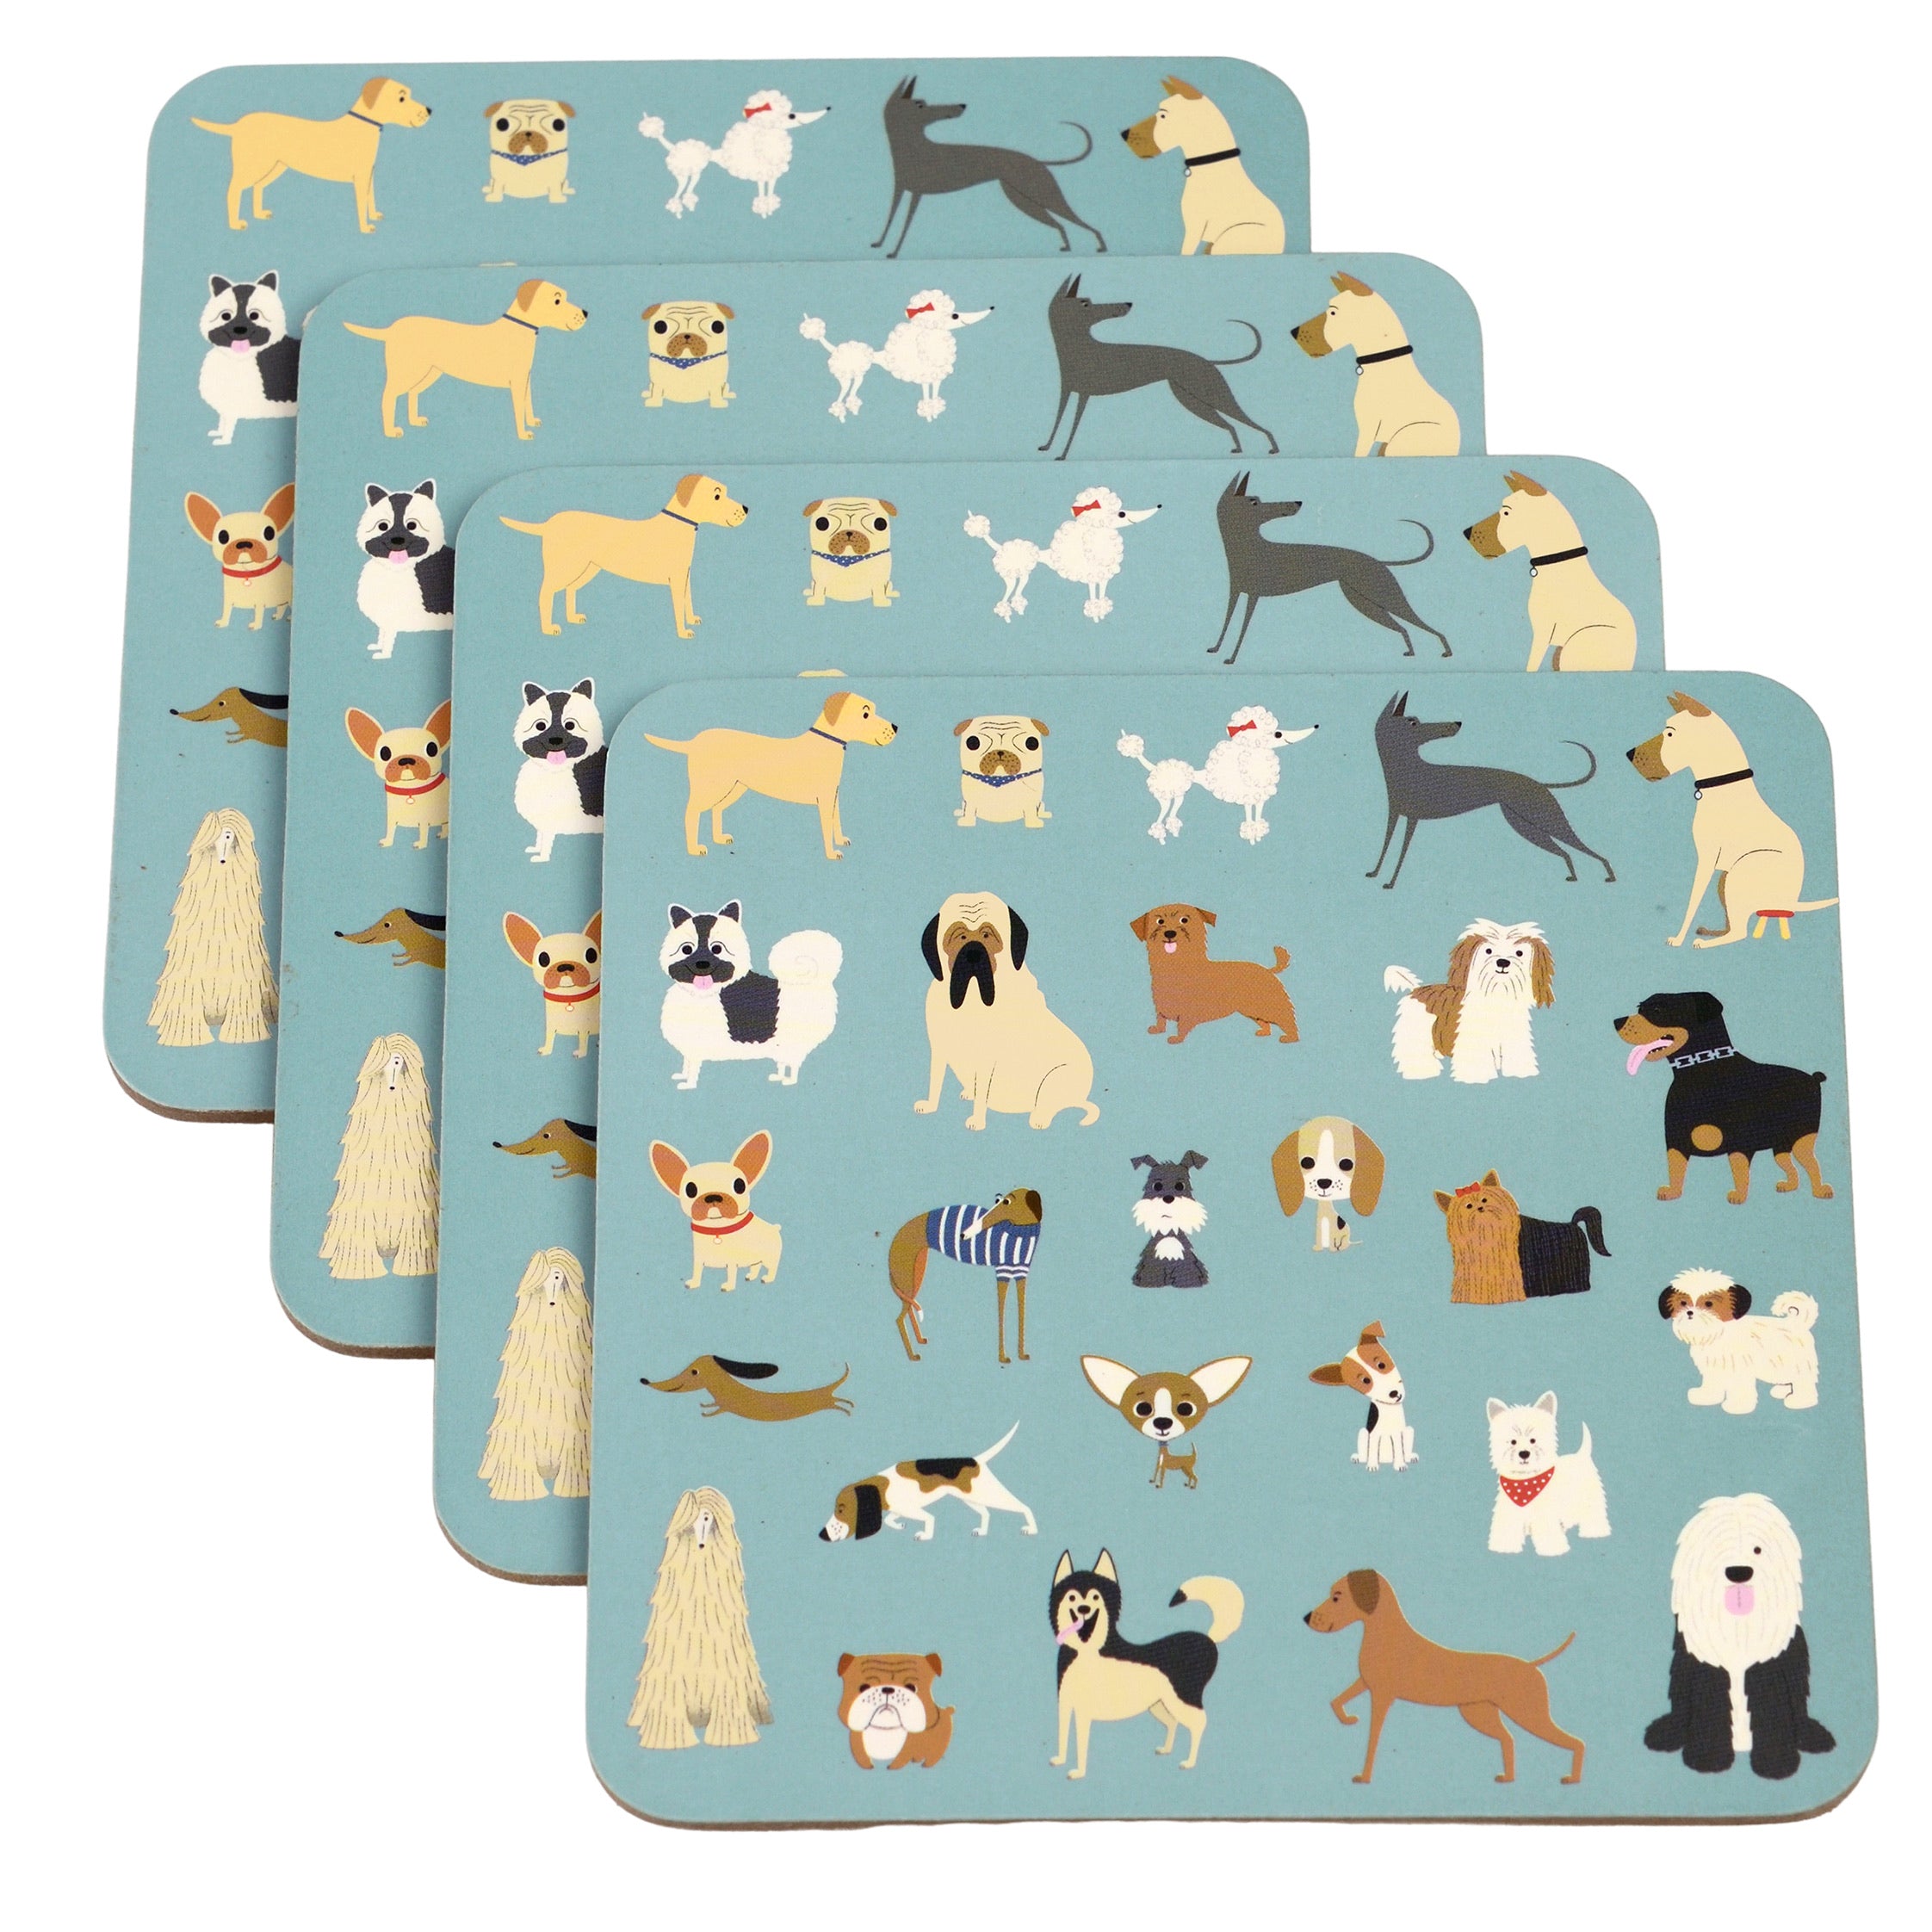 Best In Show Coasters (Set Of 4)